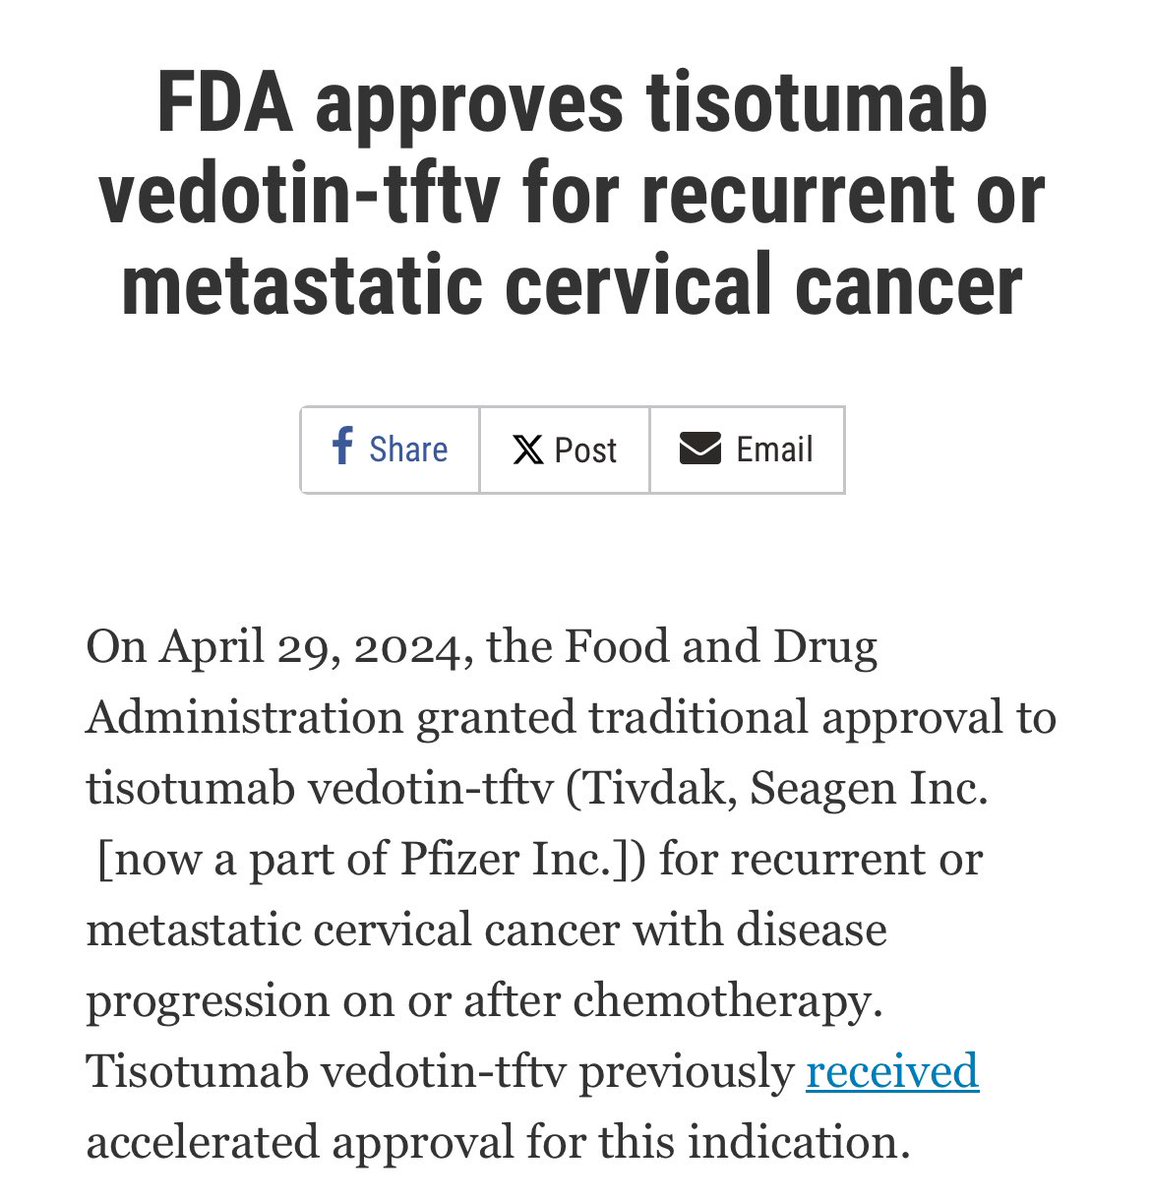 A little under the shadow of DESTINY-Breast06, but…

On September 20, 2021, FDA granted accelerated approval to tisotumab vedotin. 

Today FDA fully approves tisotumab vedotin for recurrent or metastatic cervical cancer. 

fda.gov/drugs/resource…